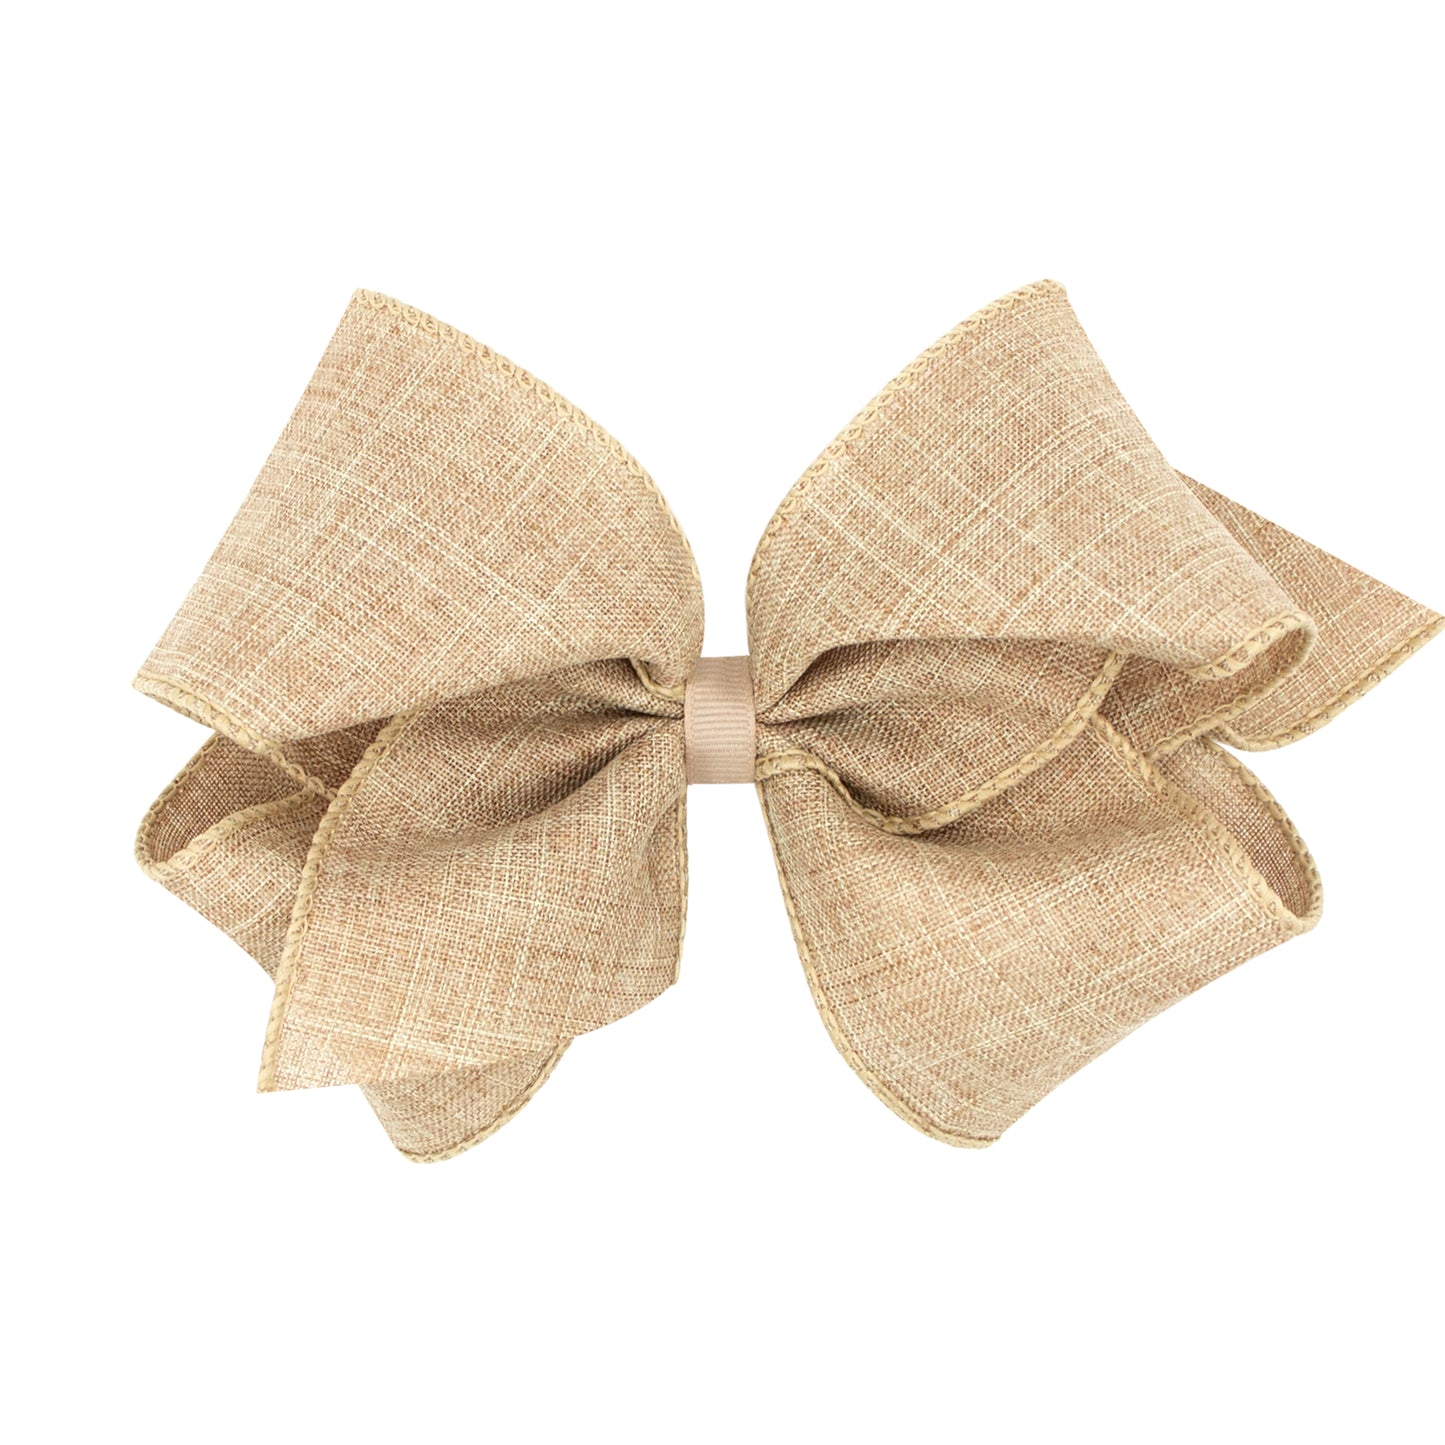 Wee Ones King Linen Girls Hair Bow